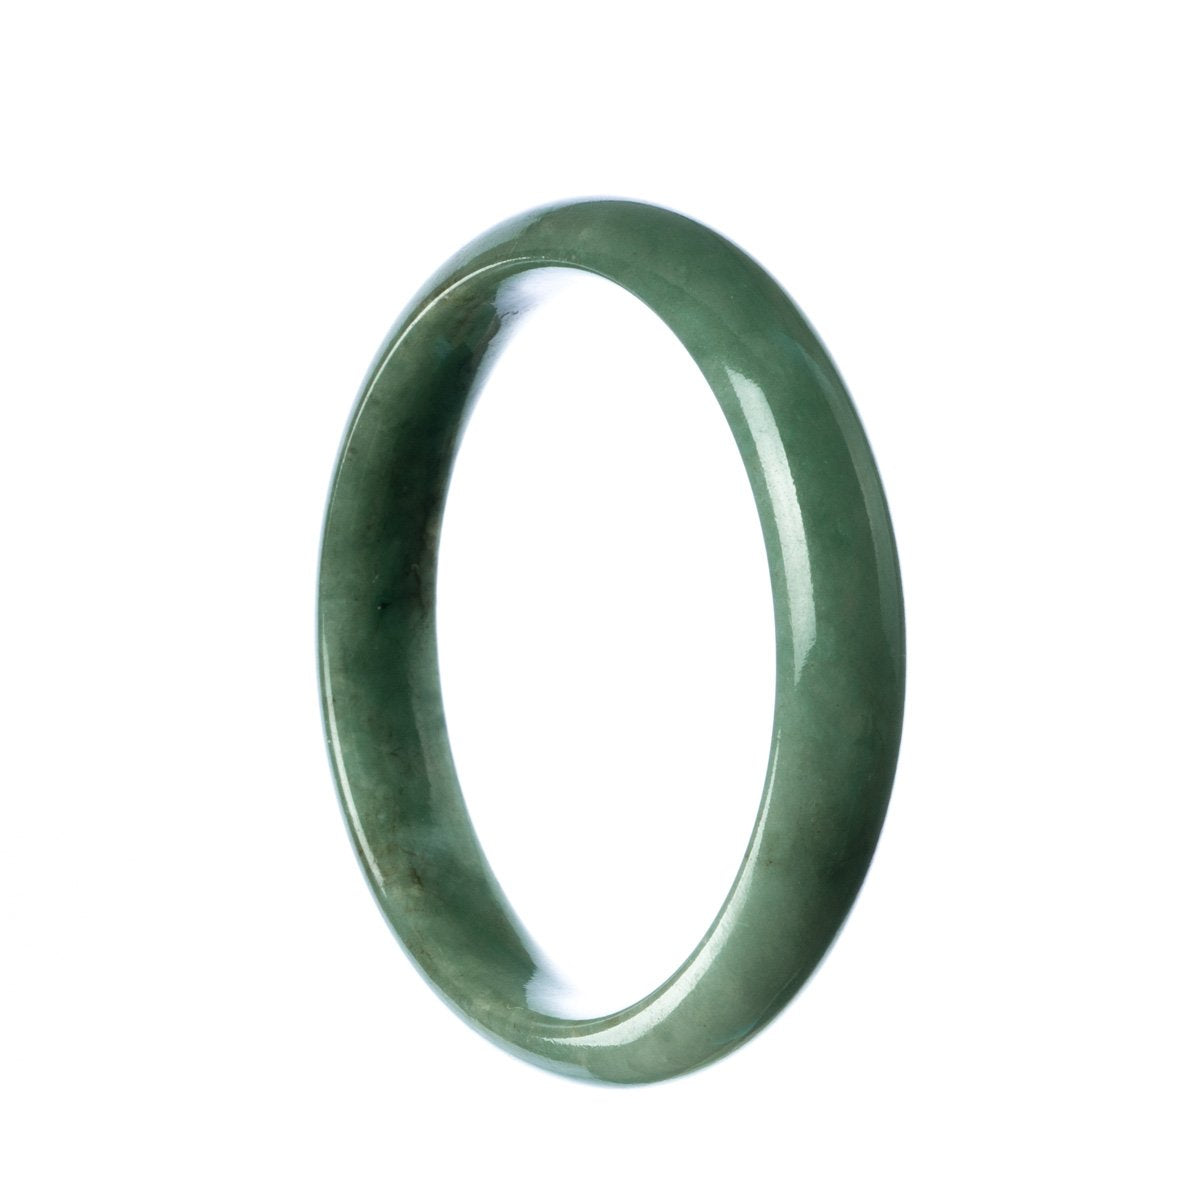 A beautifully crafted green jade bangle with a half moon design, made from genuine Type A jade. Perfect for adding a touch of elegance to any outfit.